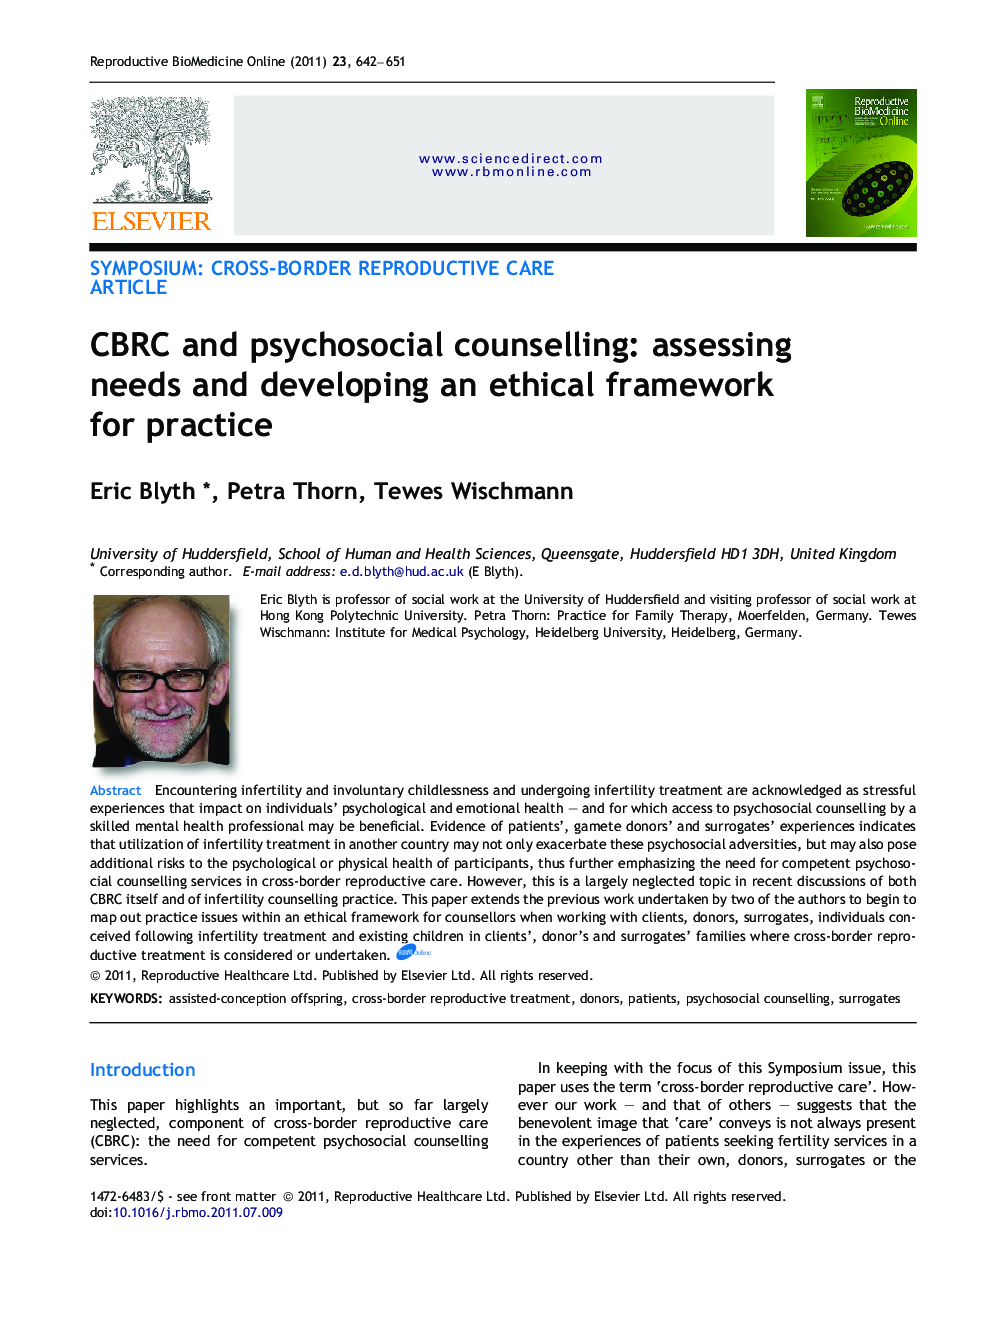 CBRC and psychosocial counselling: assessing needs and developing an ethical framework for practice 